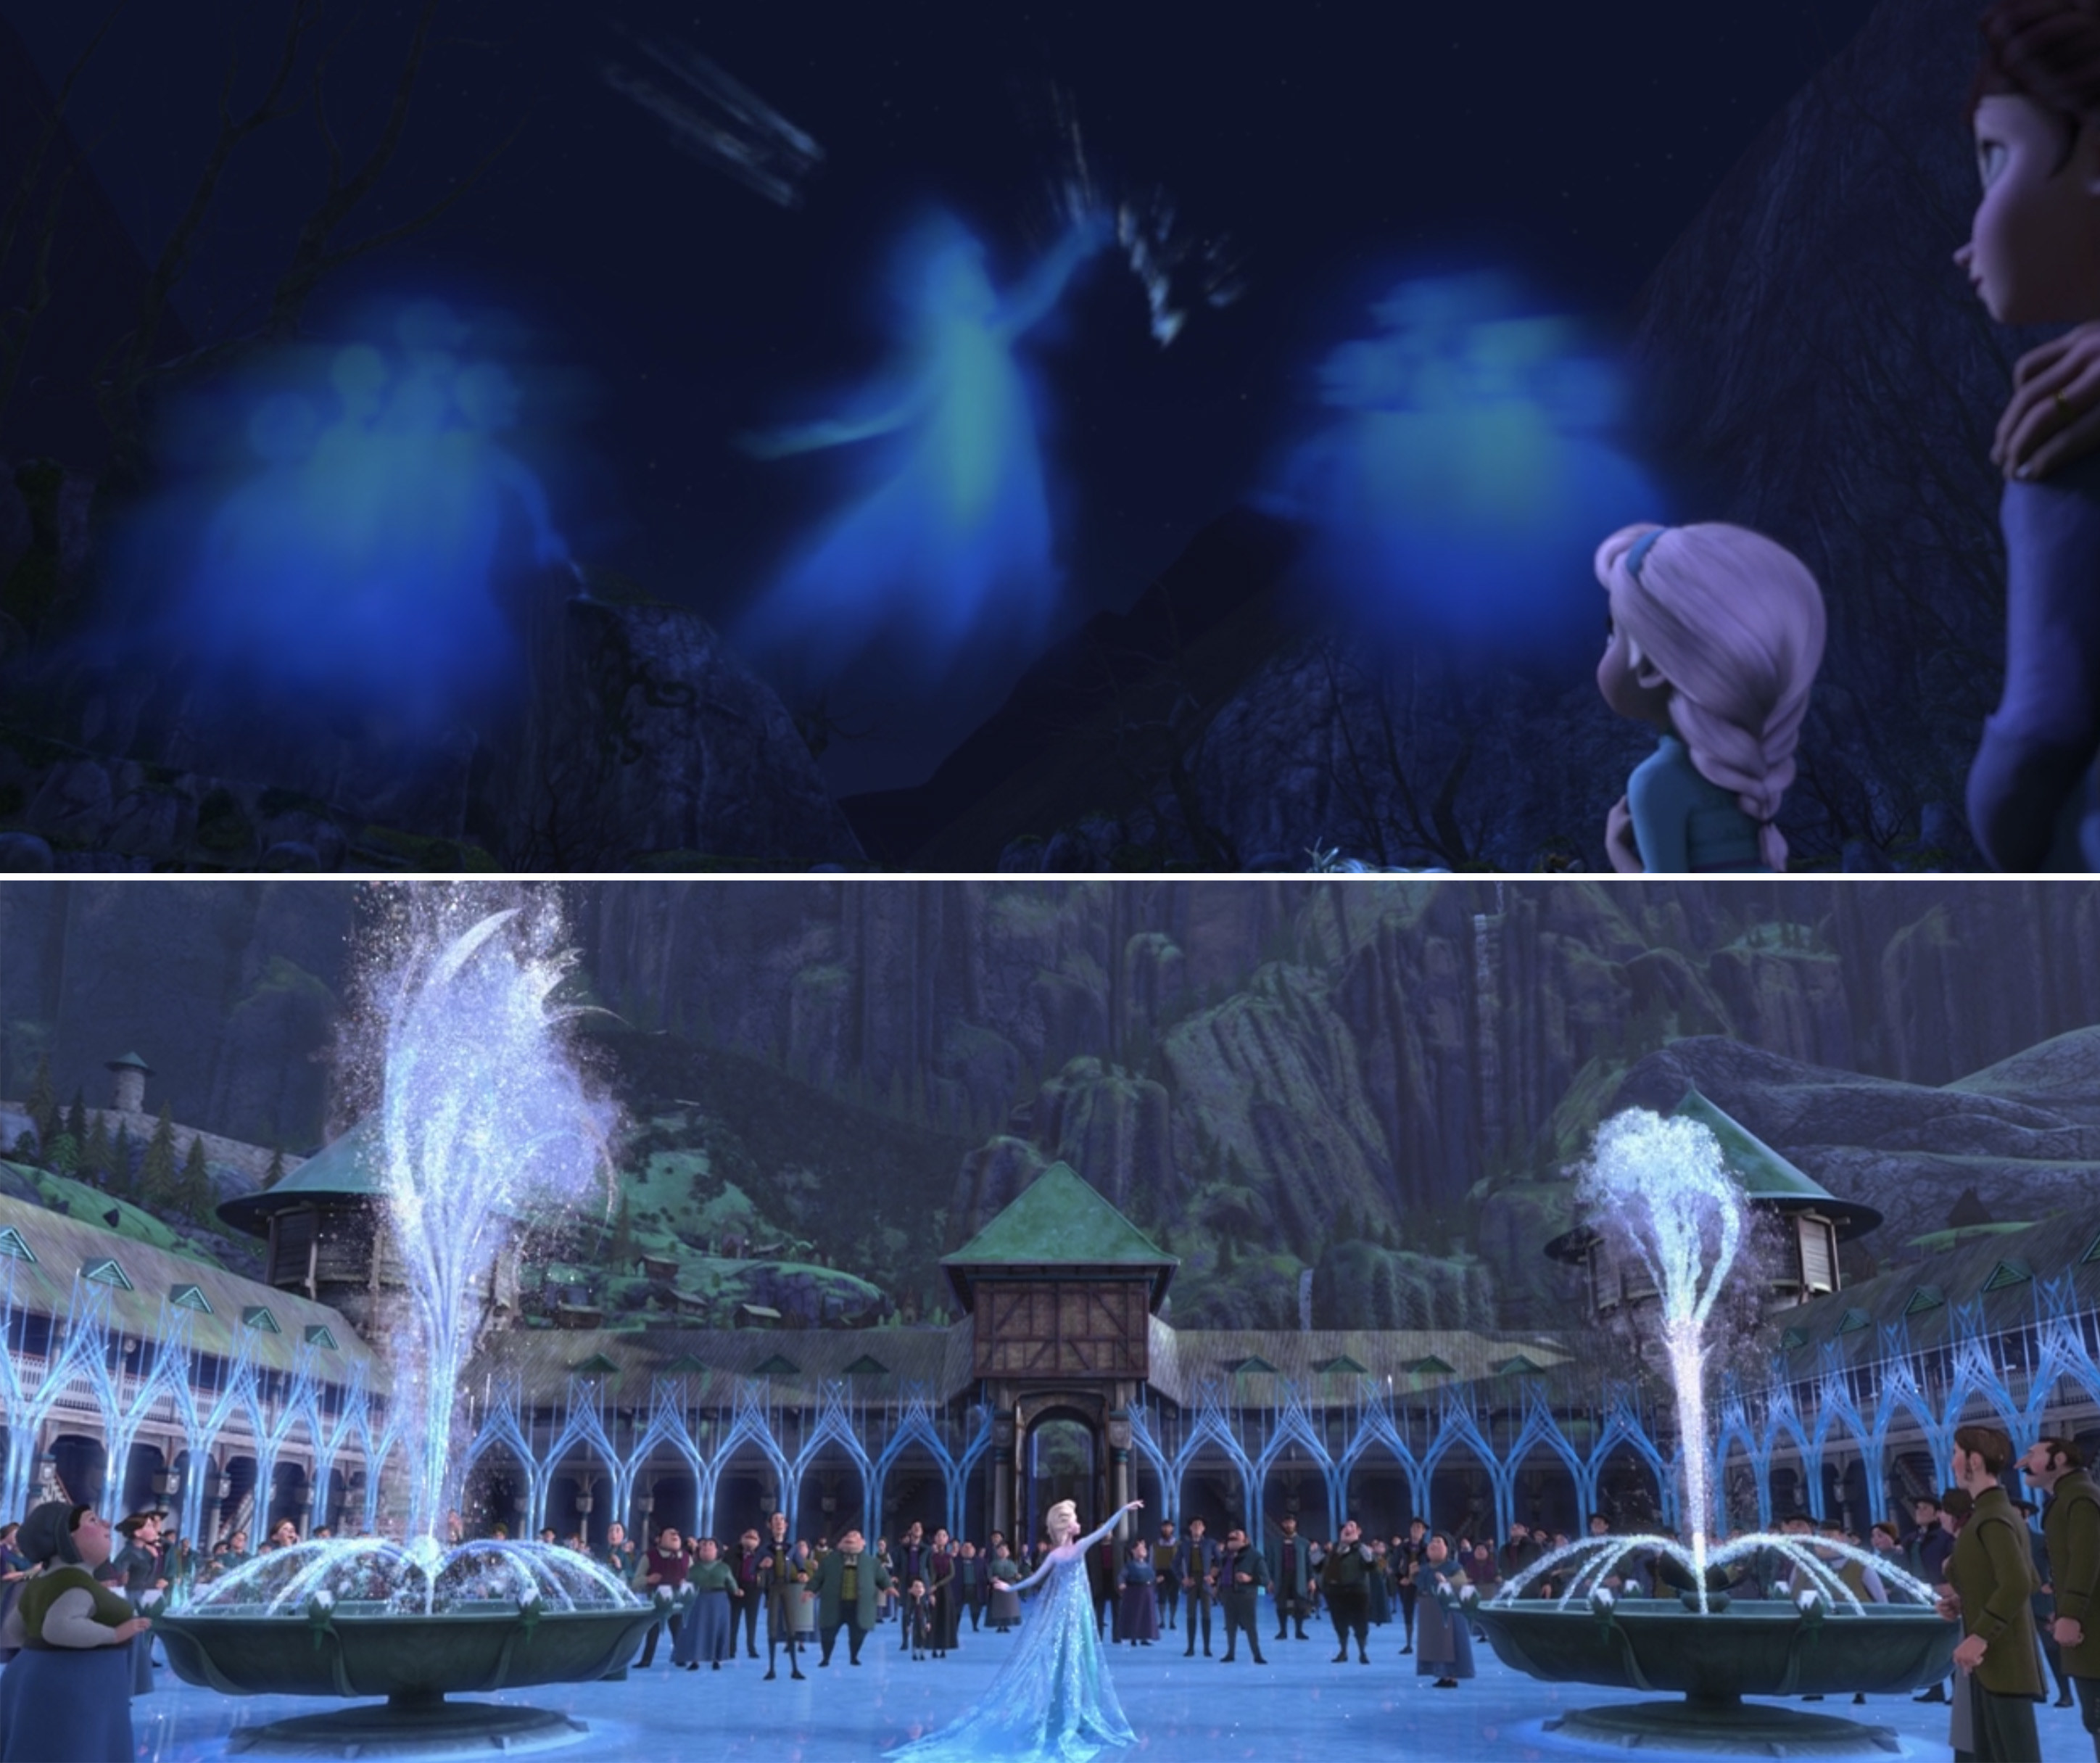 the entity scenes from frozen